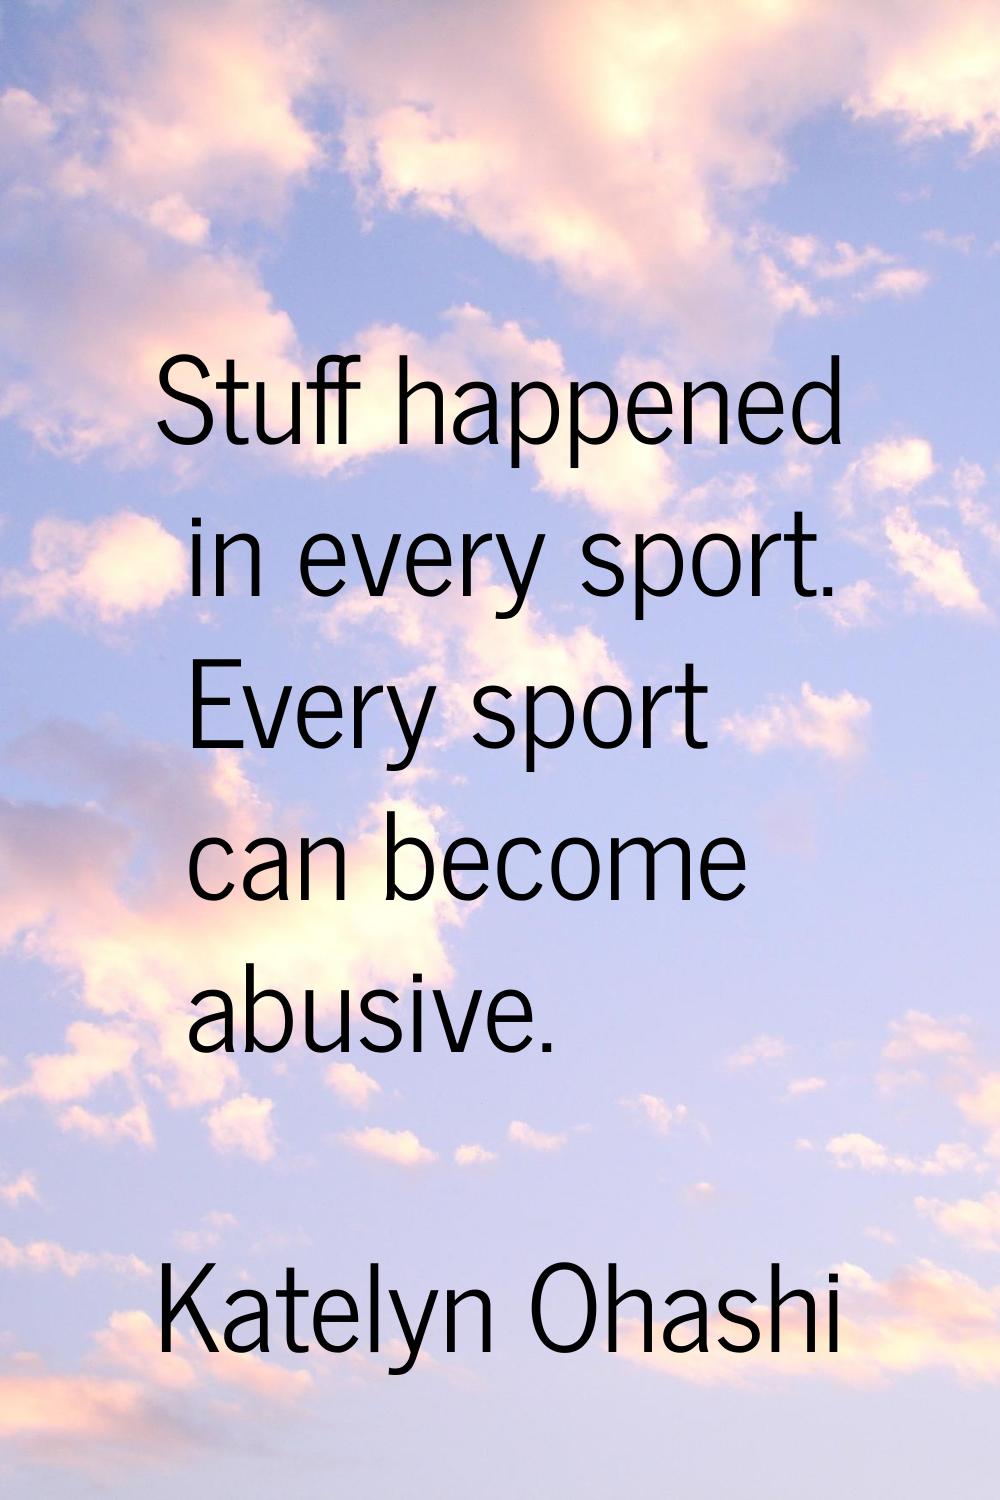 Stuff happened in every sport. Every sport can become abusive.